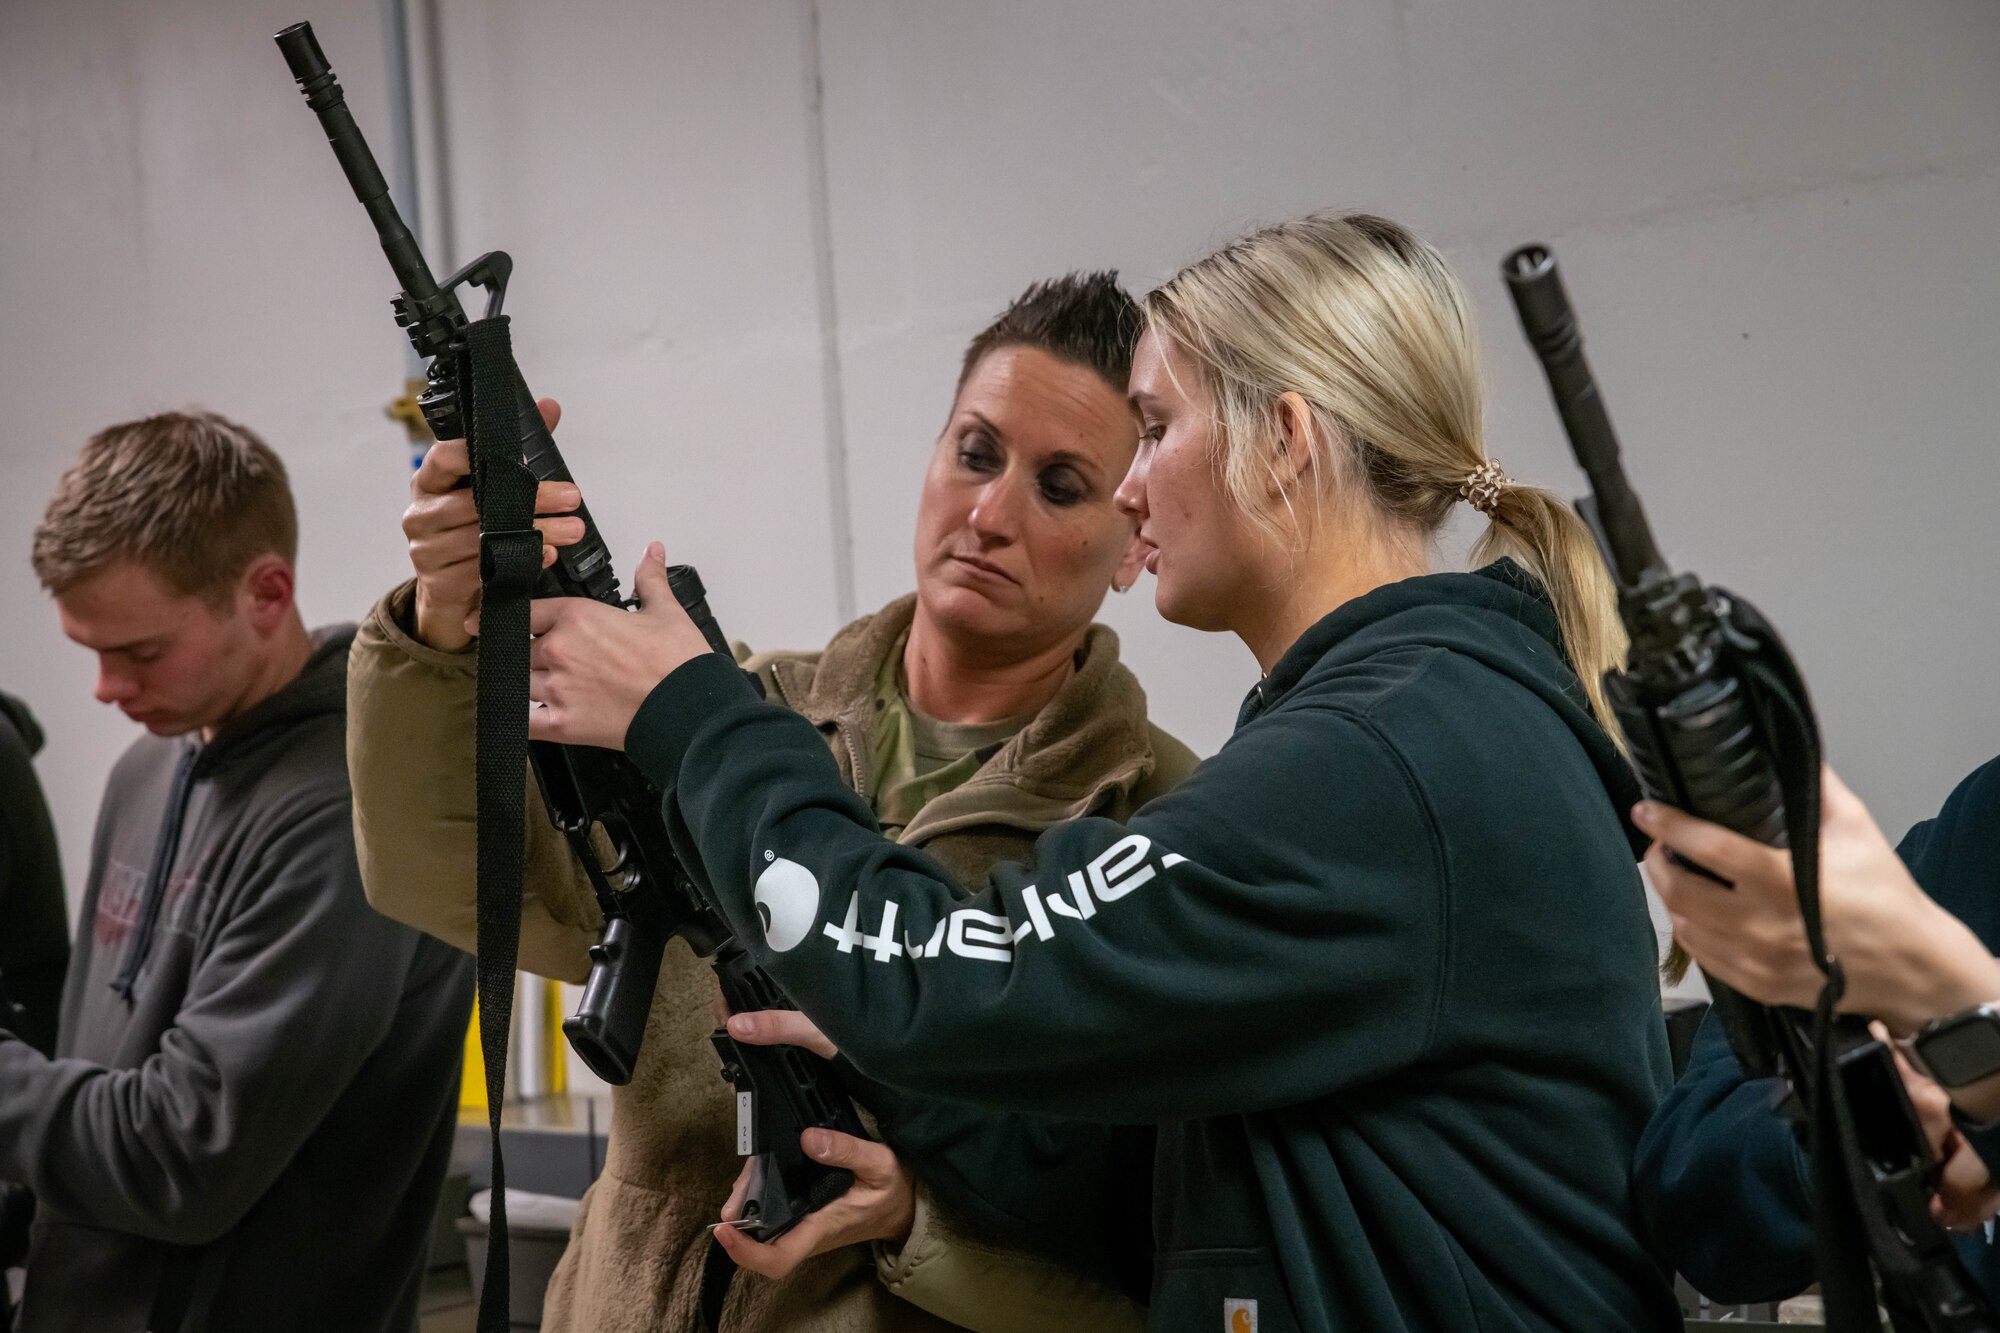 South Dakota Air National Guard Master Sgt. Mandy Jongeward, left, security forces flight sergeant, 114th Fighter Wing, identifies parts of the M4 carbine for student flight member Ellie Anderson, right, during a weapons familiarization training at Joe Foss Field, April 30, 2022.